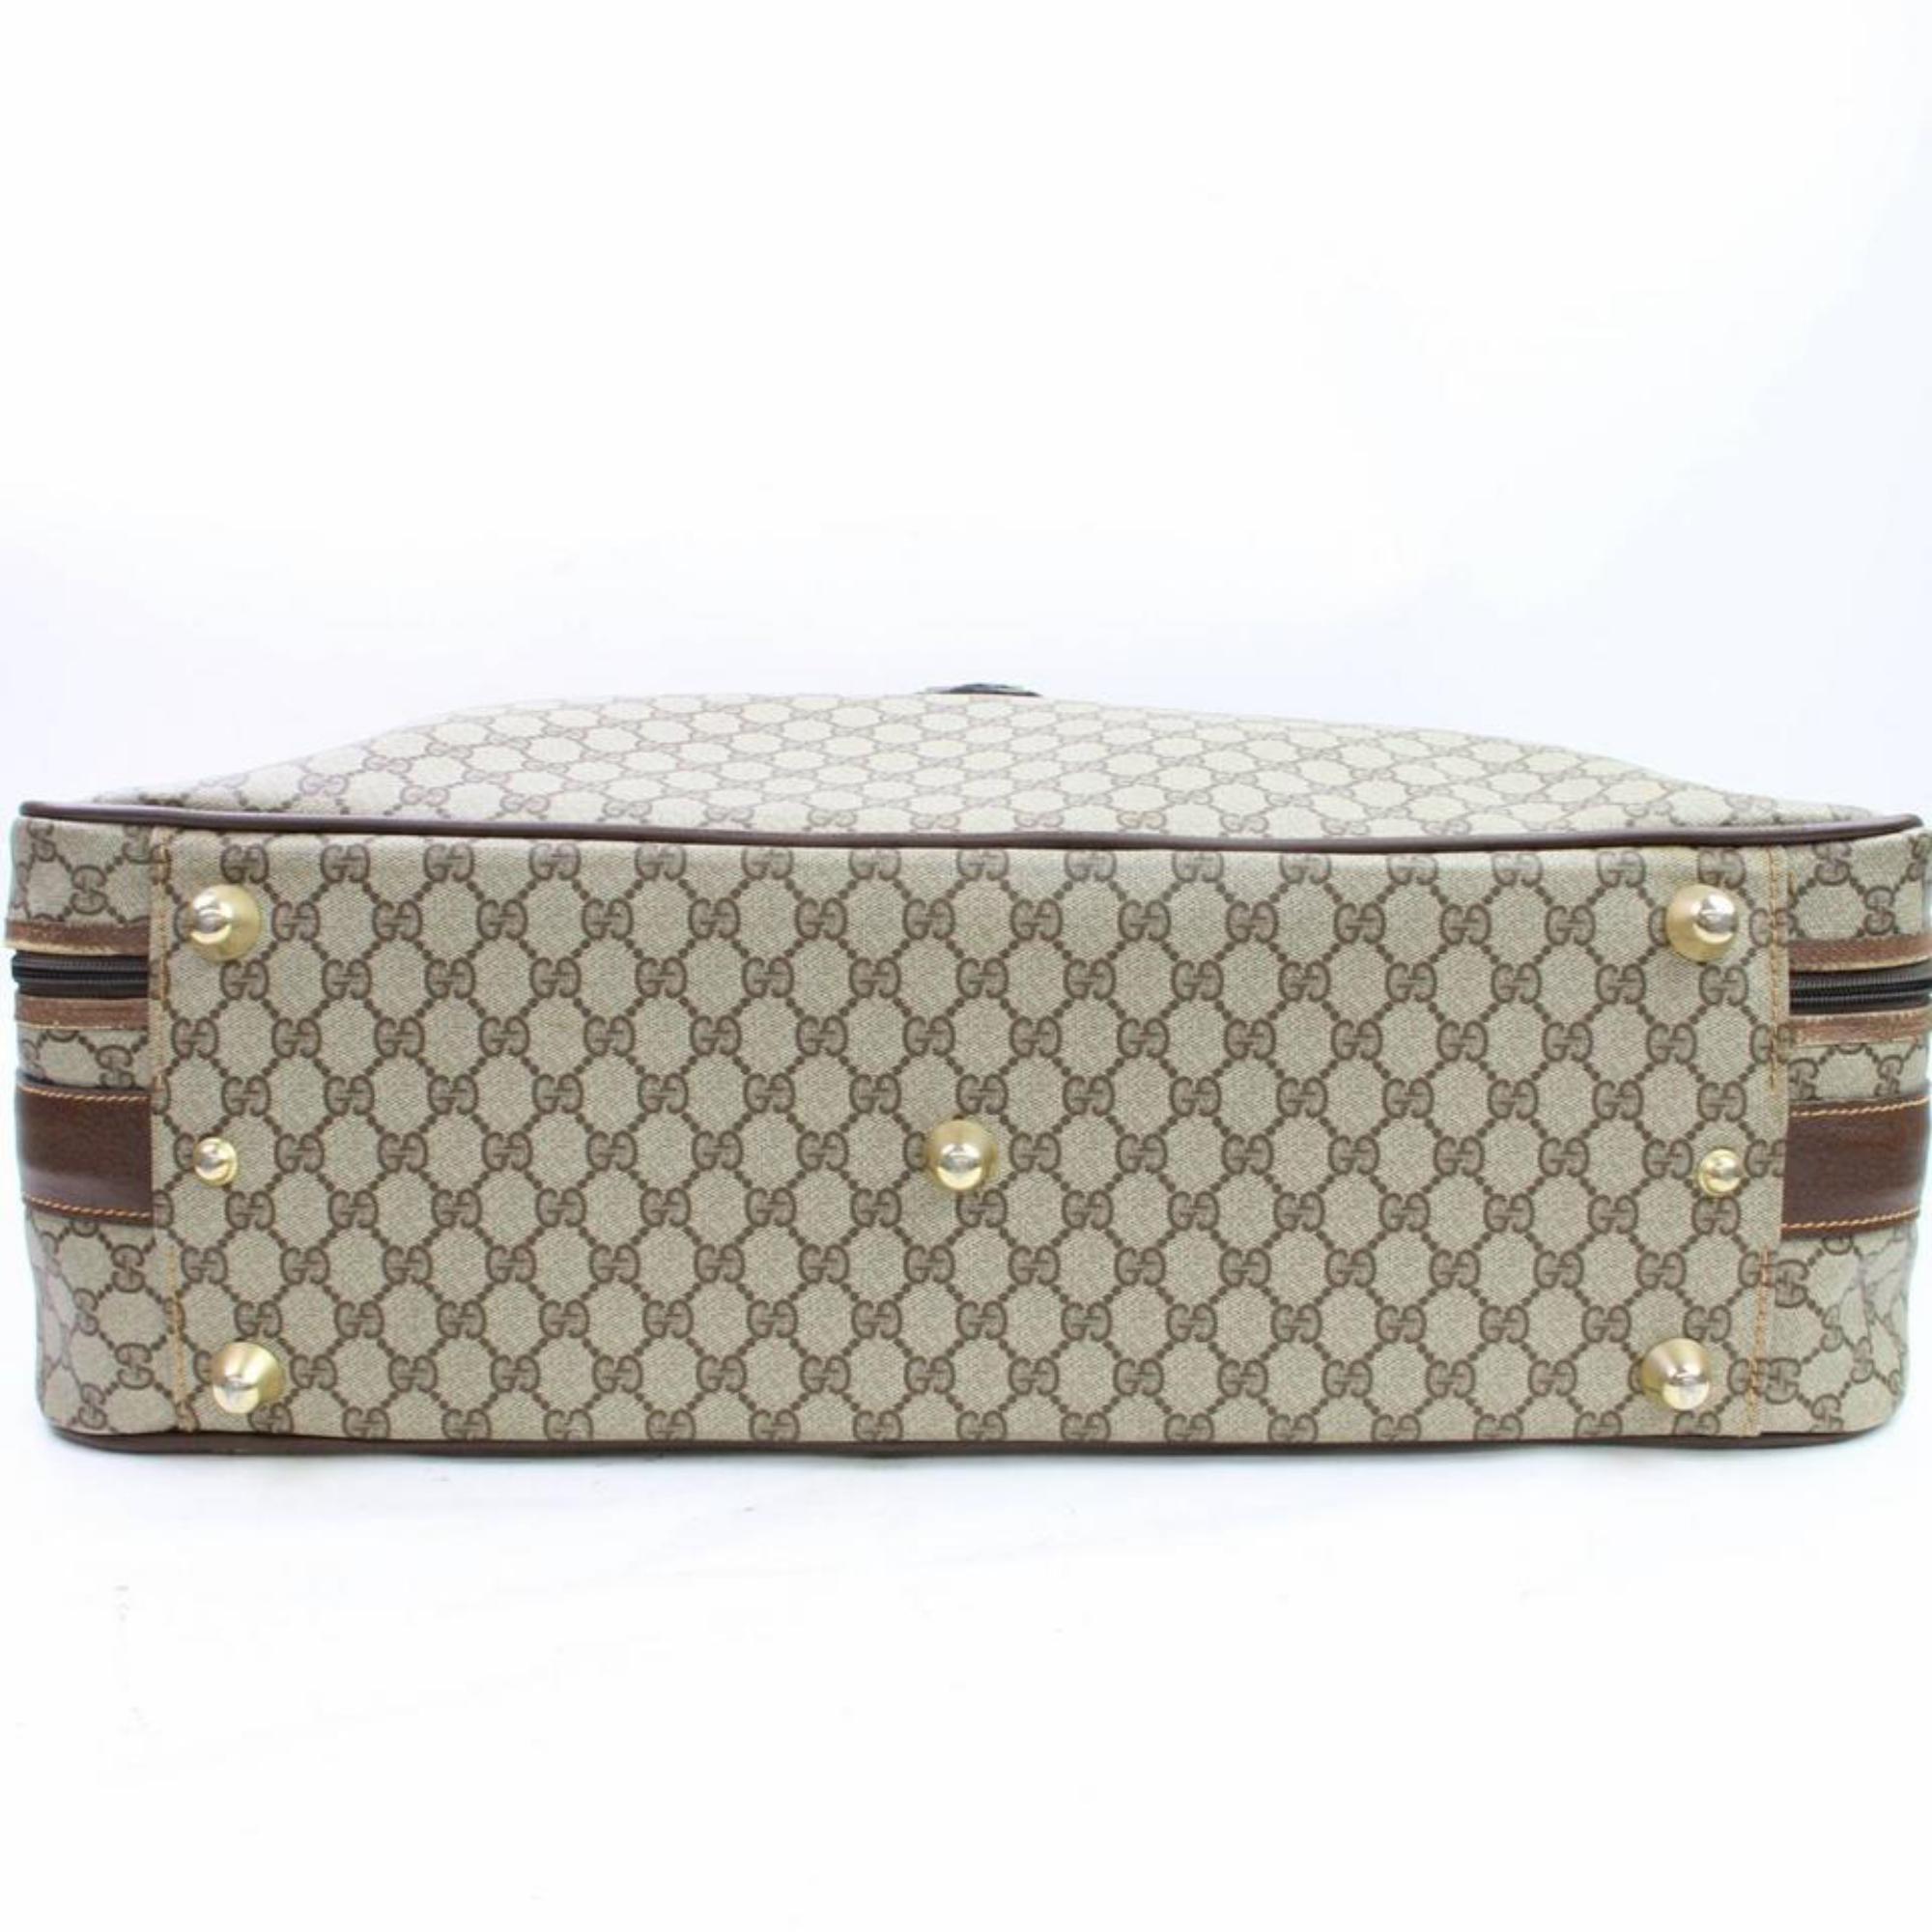 Gucci Sherry Web Supreme Suitcase 866636 Beige Coated Canvas Weekend/Travel Bag For Sale 5